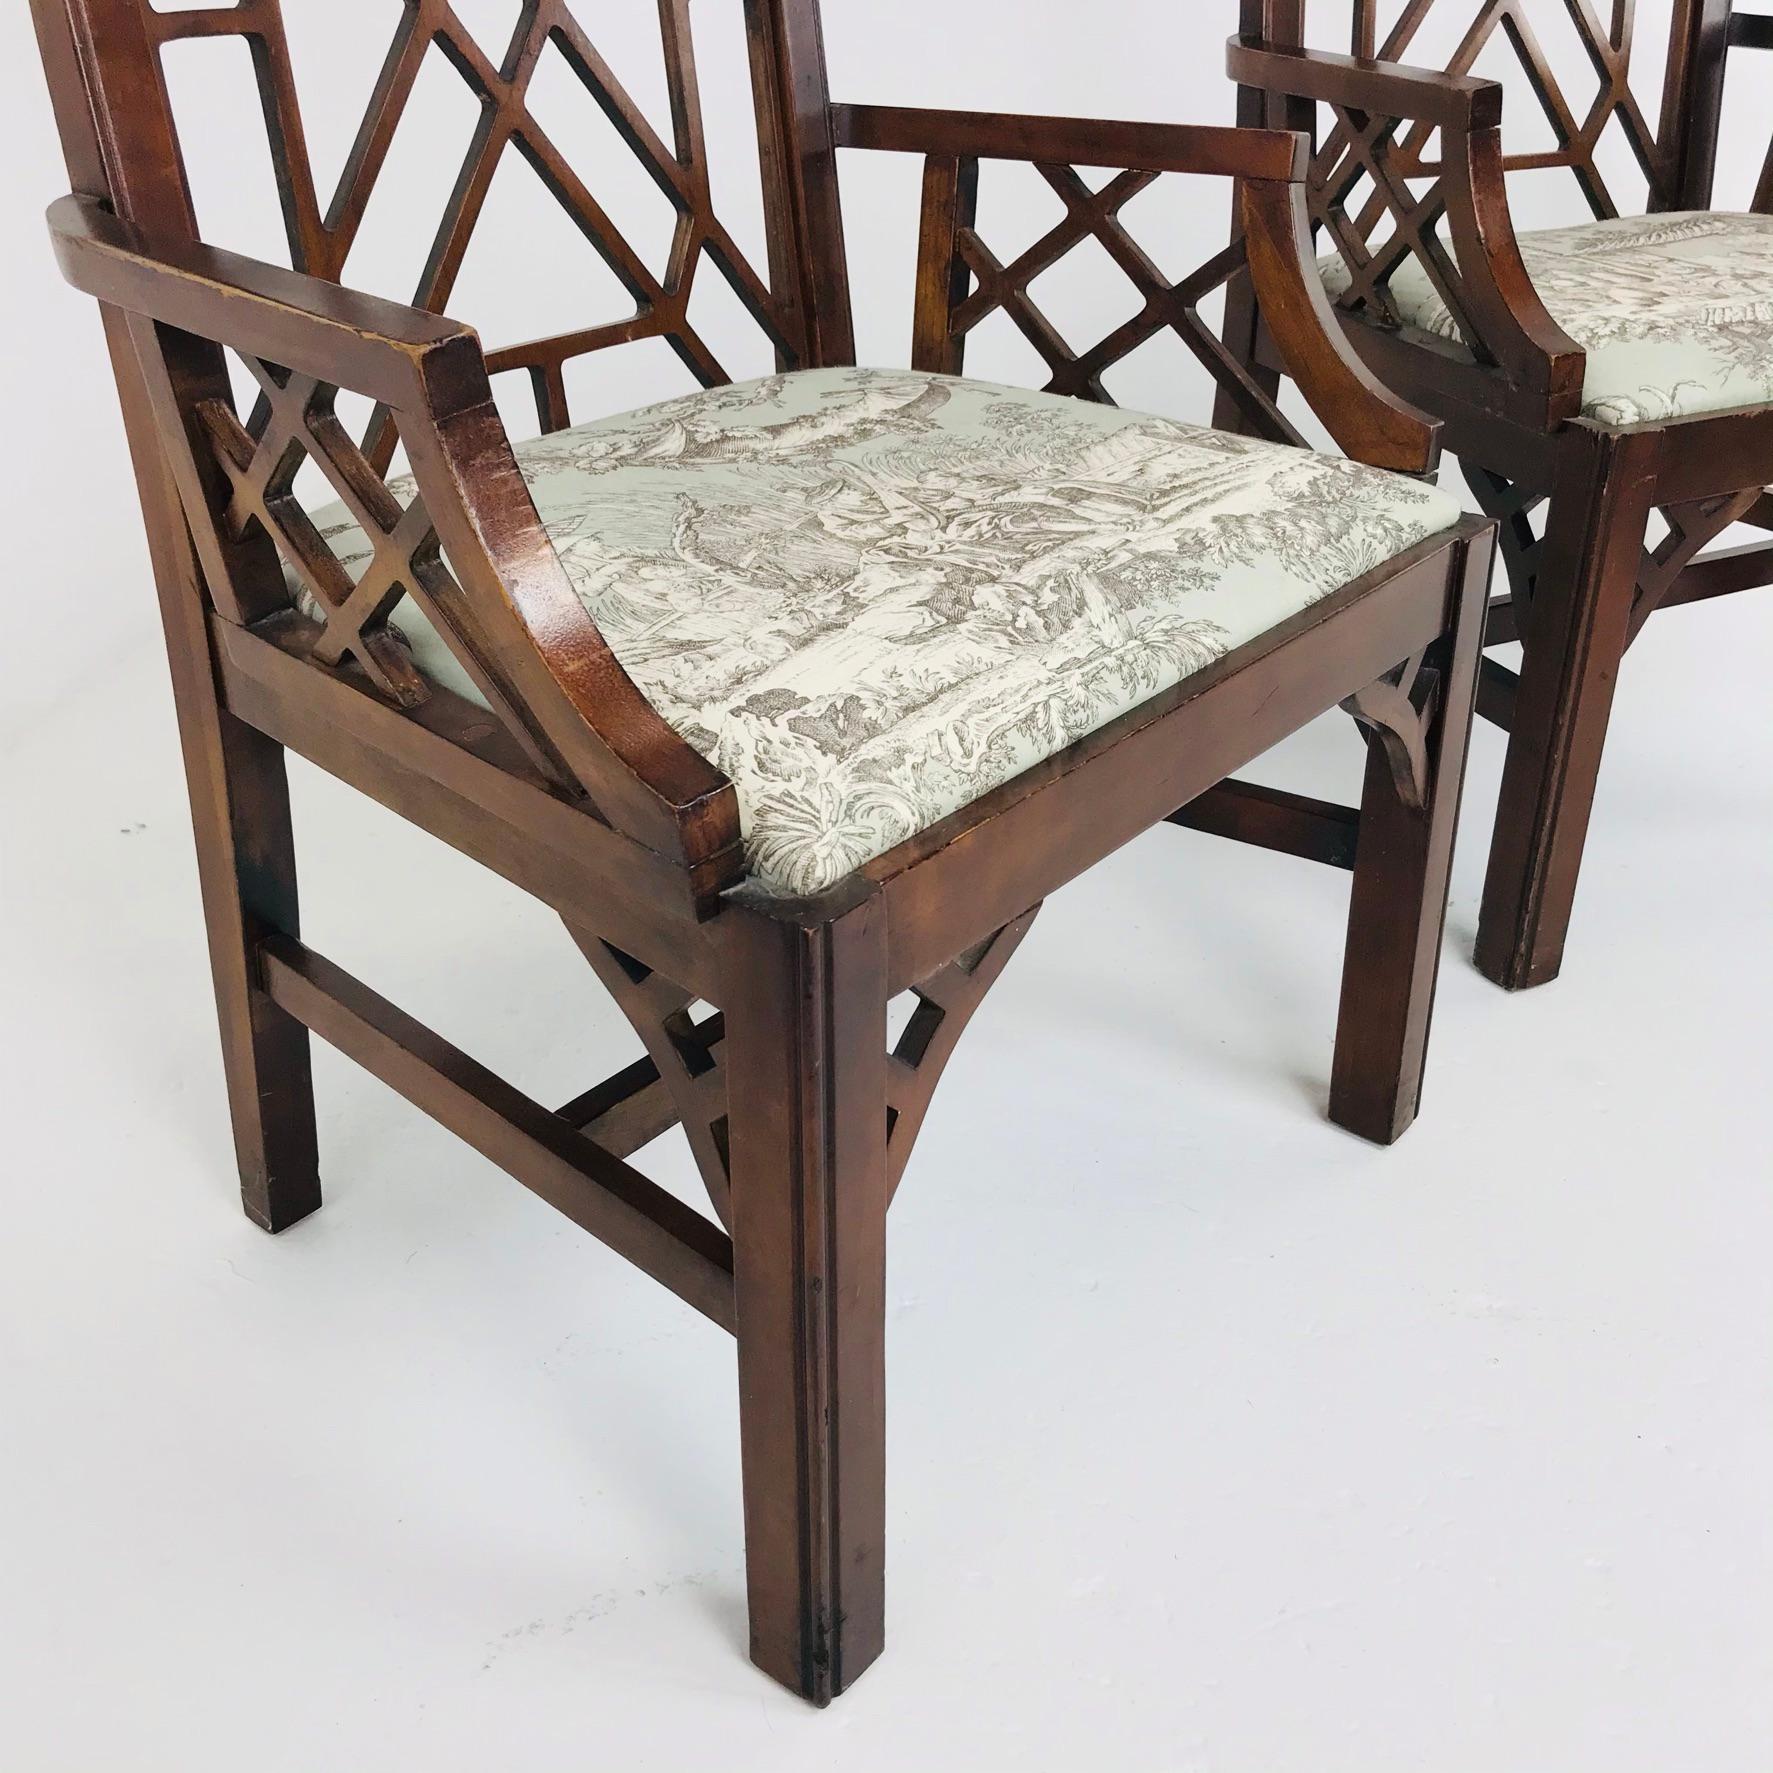 Mid-20th Century Pair of Hollywood Regency Chinese Chippendale Chairs